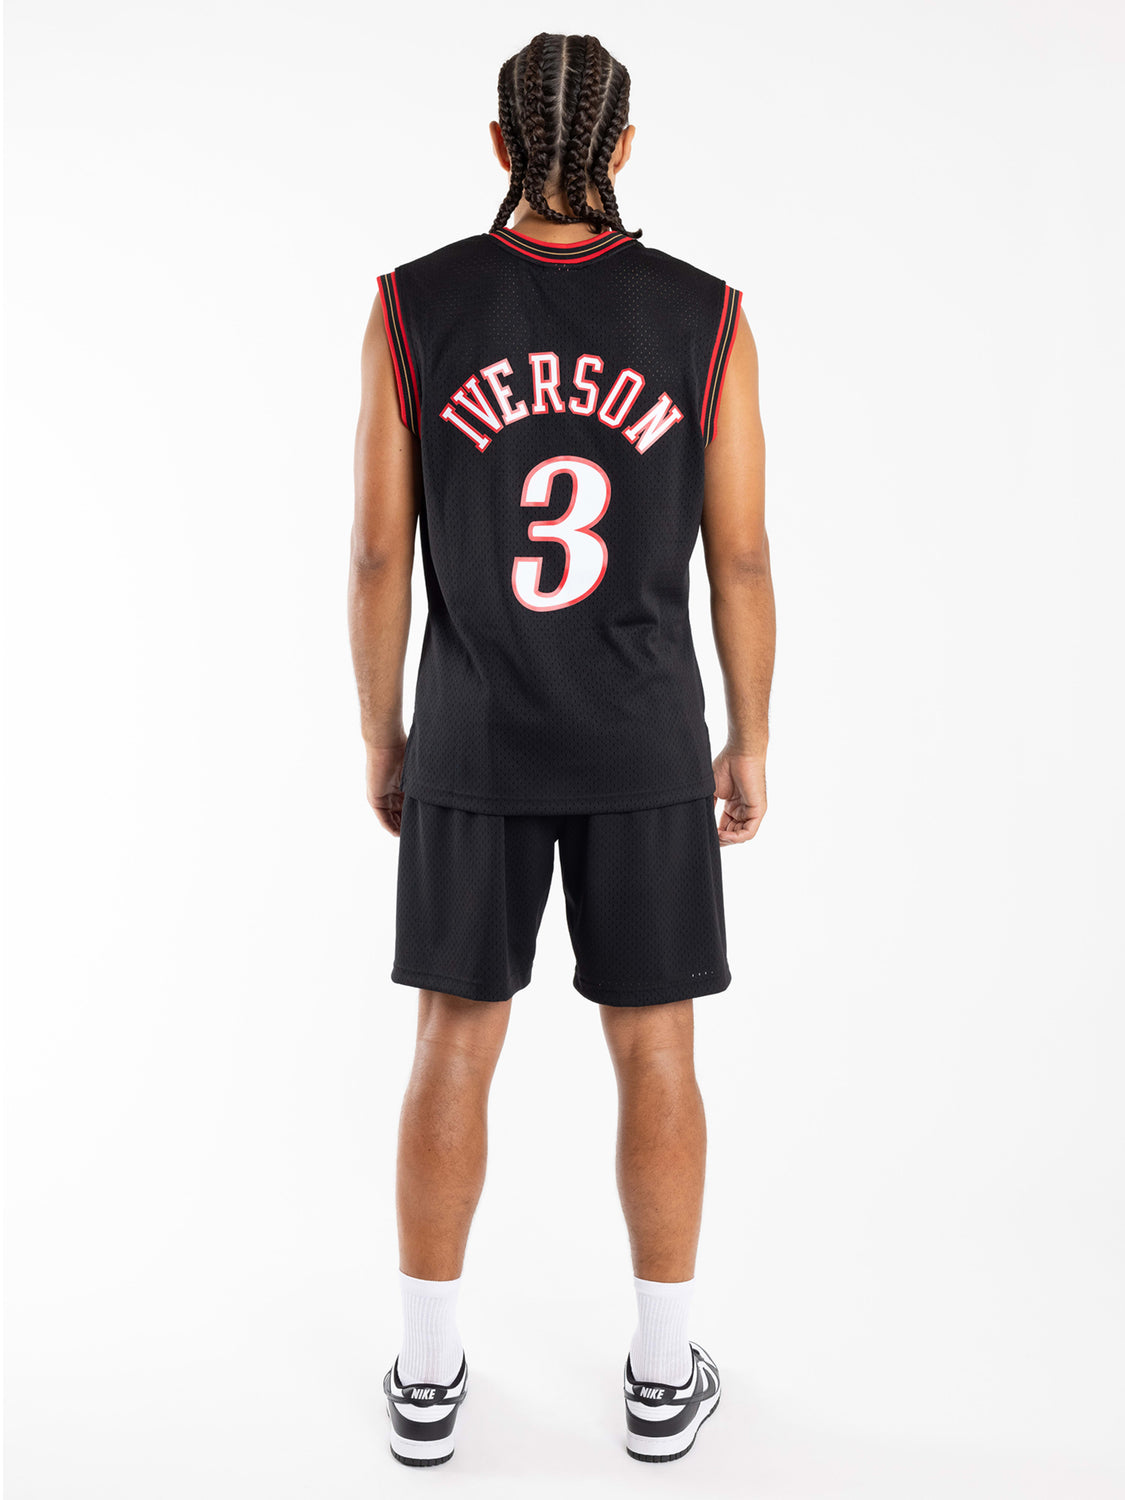 iverson  Nba outfit, Basketball jersey outfit, Nba jersey outfit